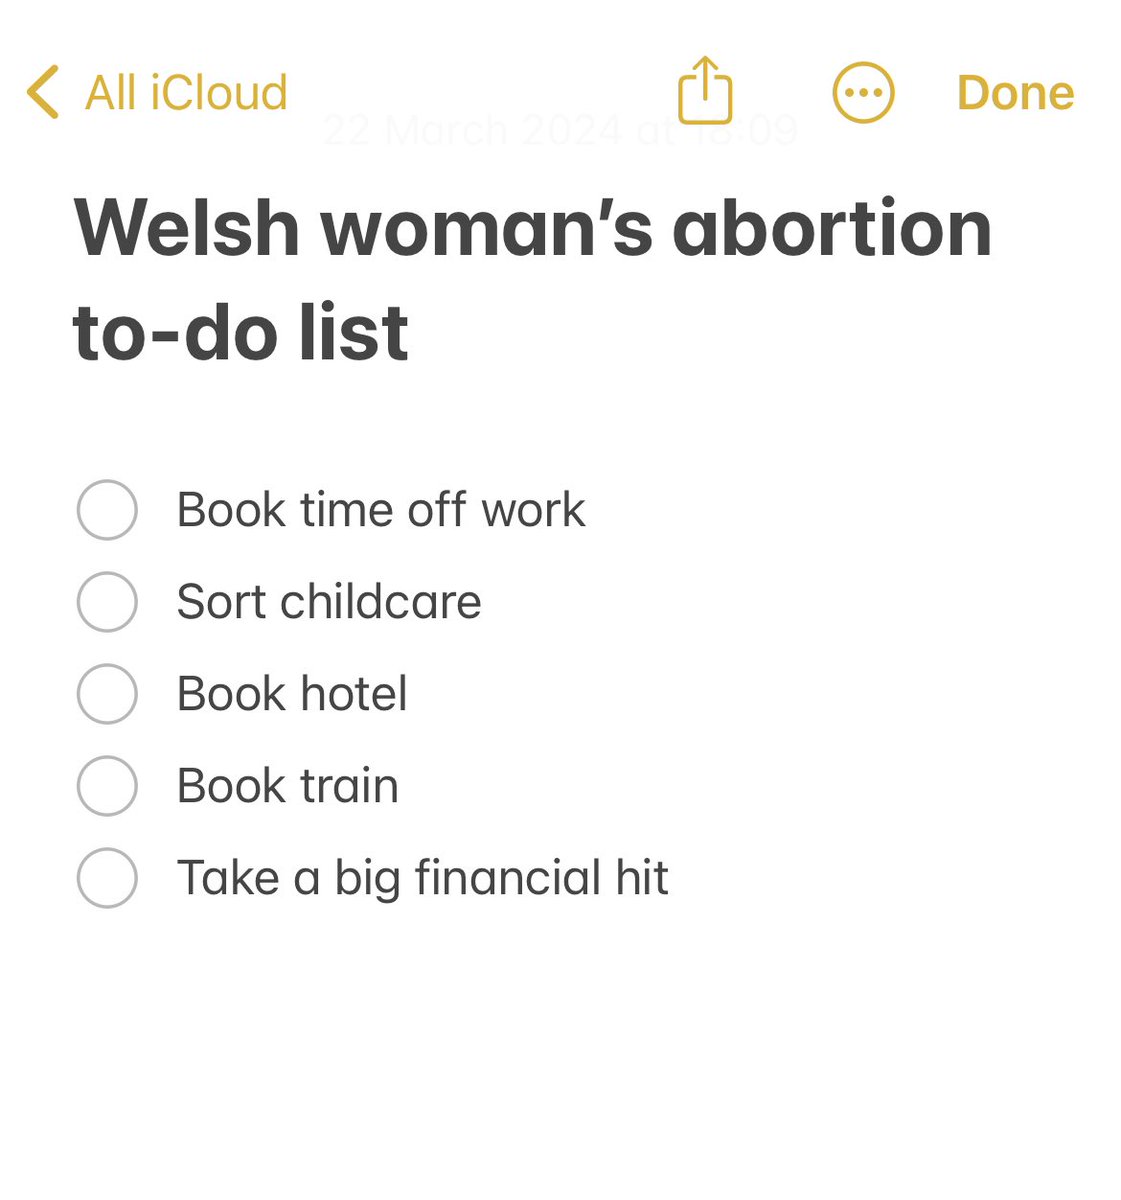 @GuiltFemPod In many parts of Wales there’s no abortion care beyond 9 weeks and after 18 weeks there is no care available at all. Women being sent to England and forced to pay hundreds for travel and accommodation. Sign our petition for safe, local abortion care bit.ly/3IYAiYH